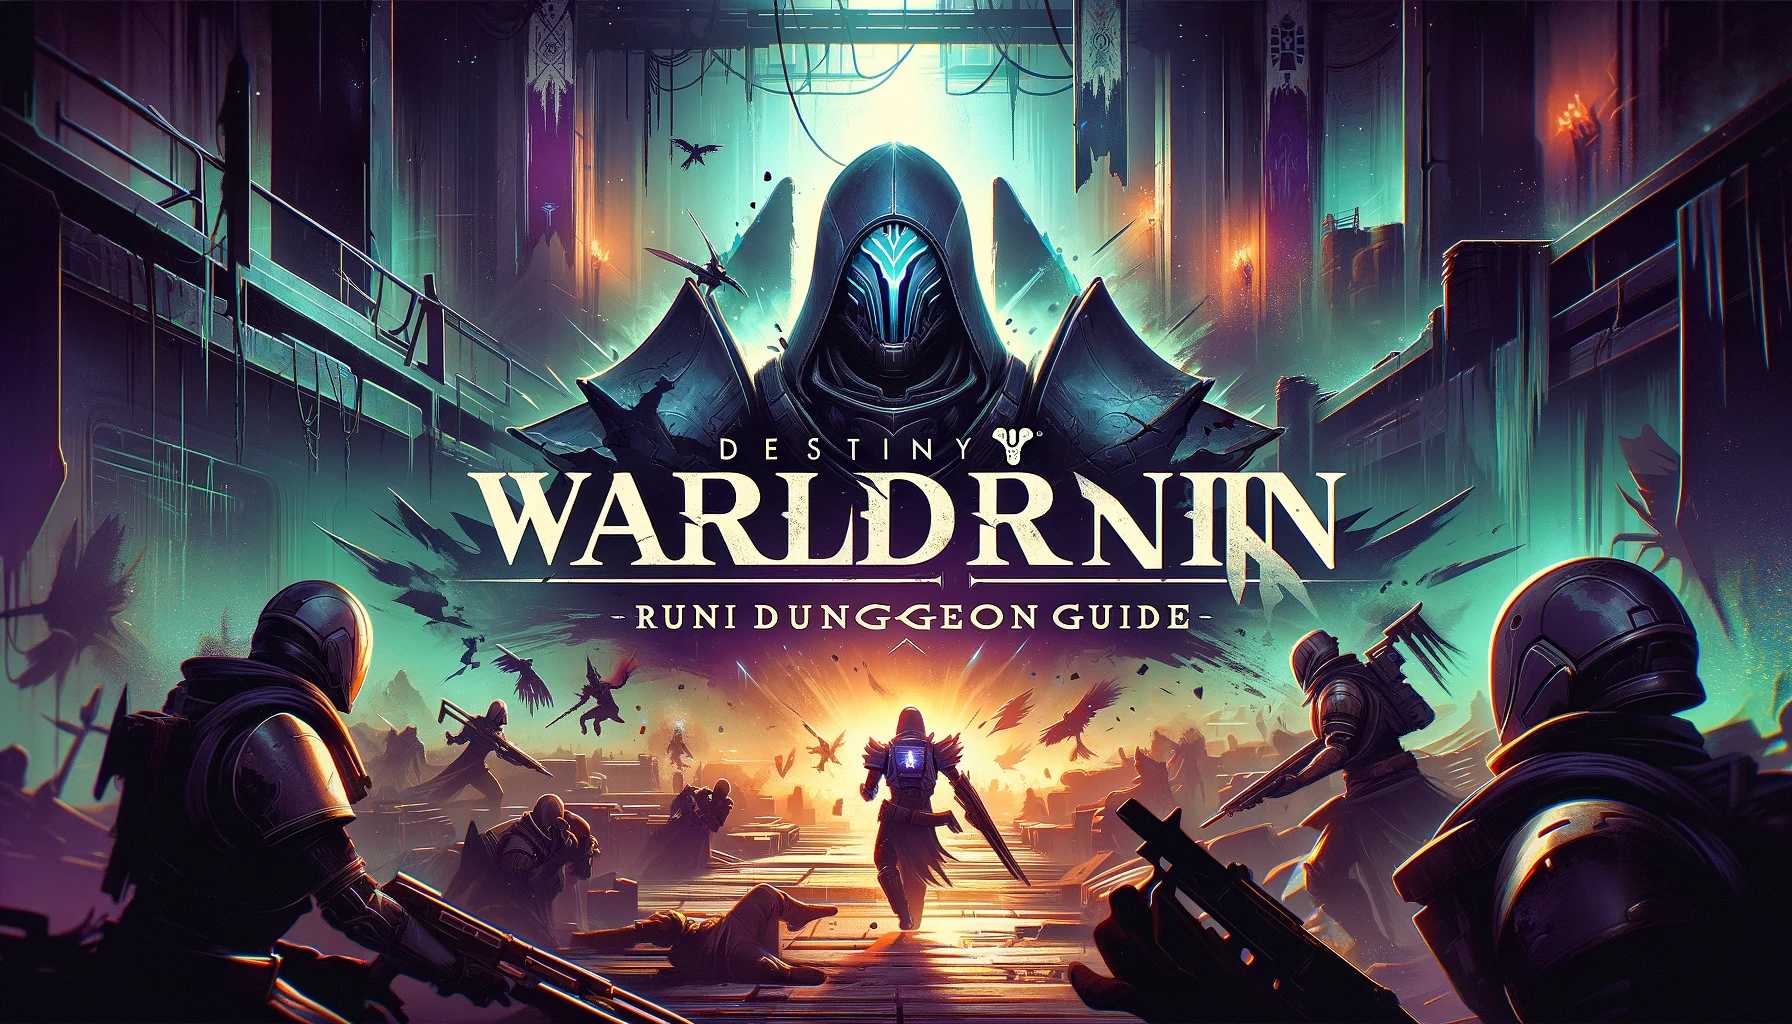 Destiny 2 Warlords Ruin Dungeon Guide